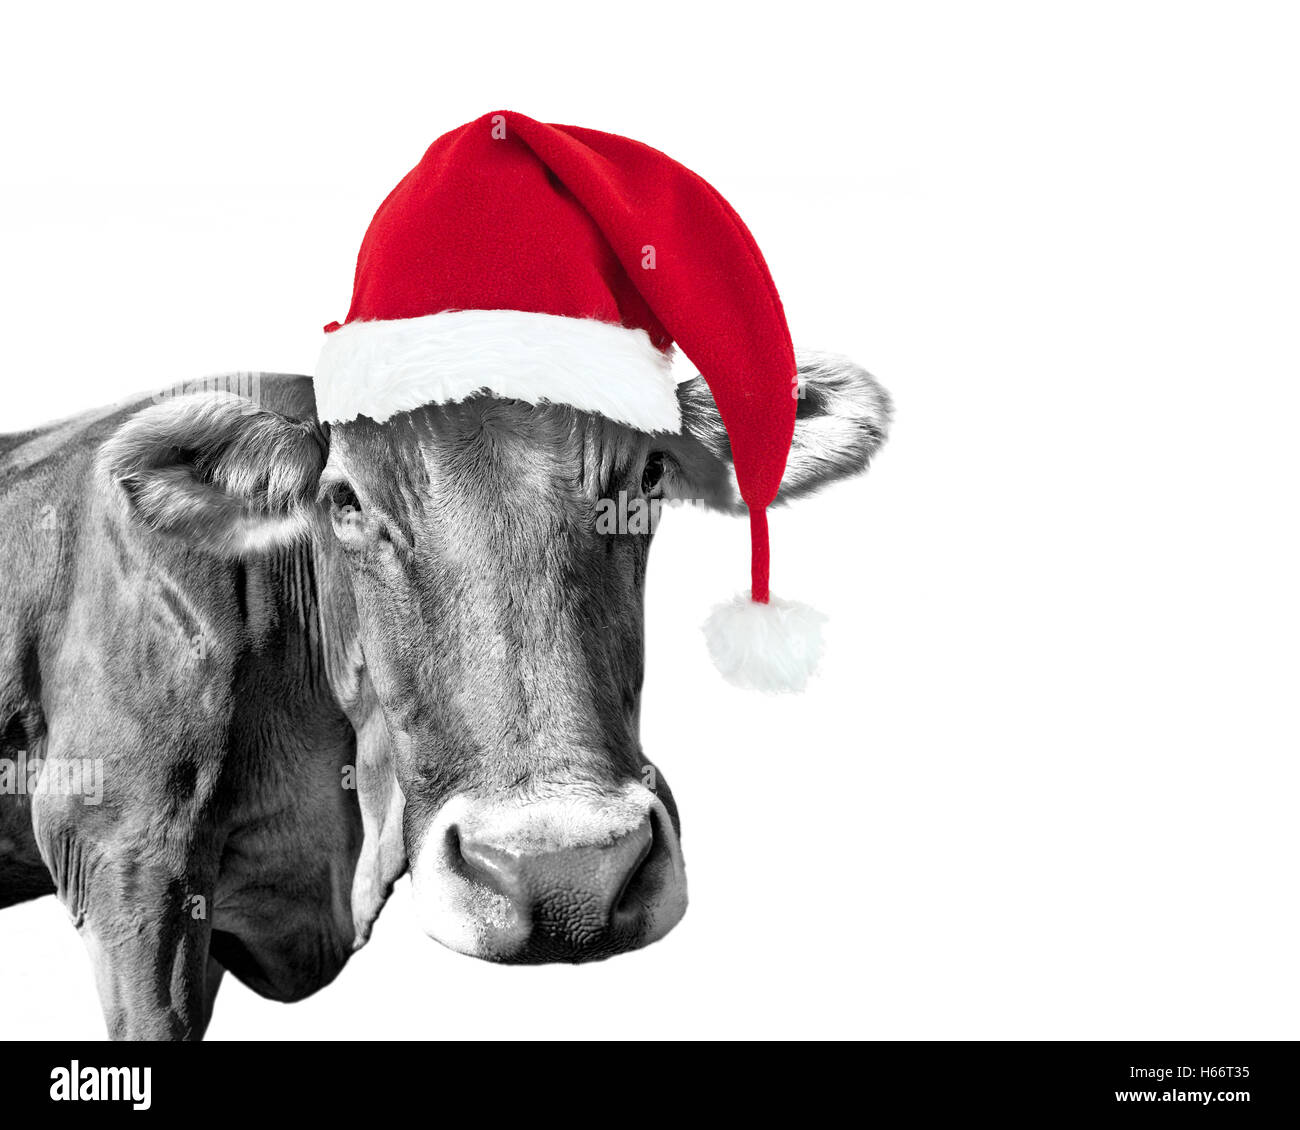 Black and white fun cow on white background with a Santa hat Stock Photo